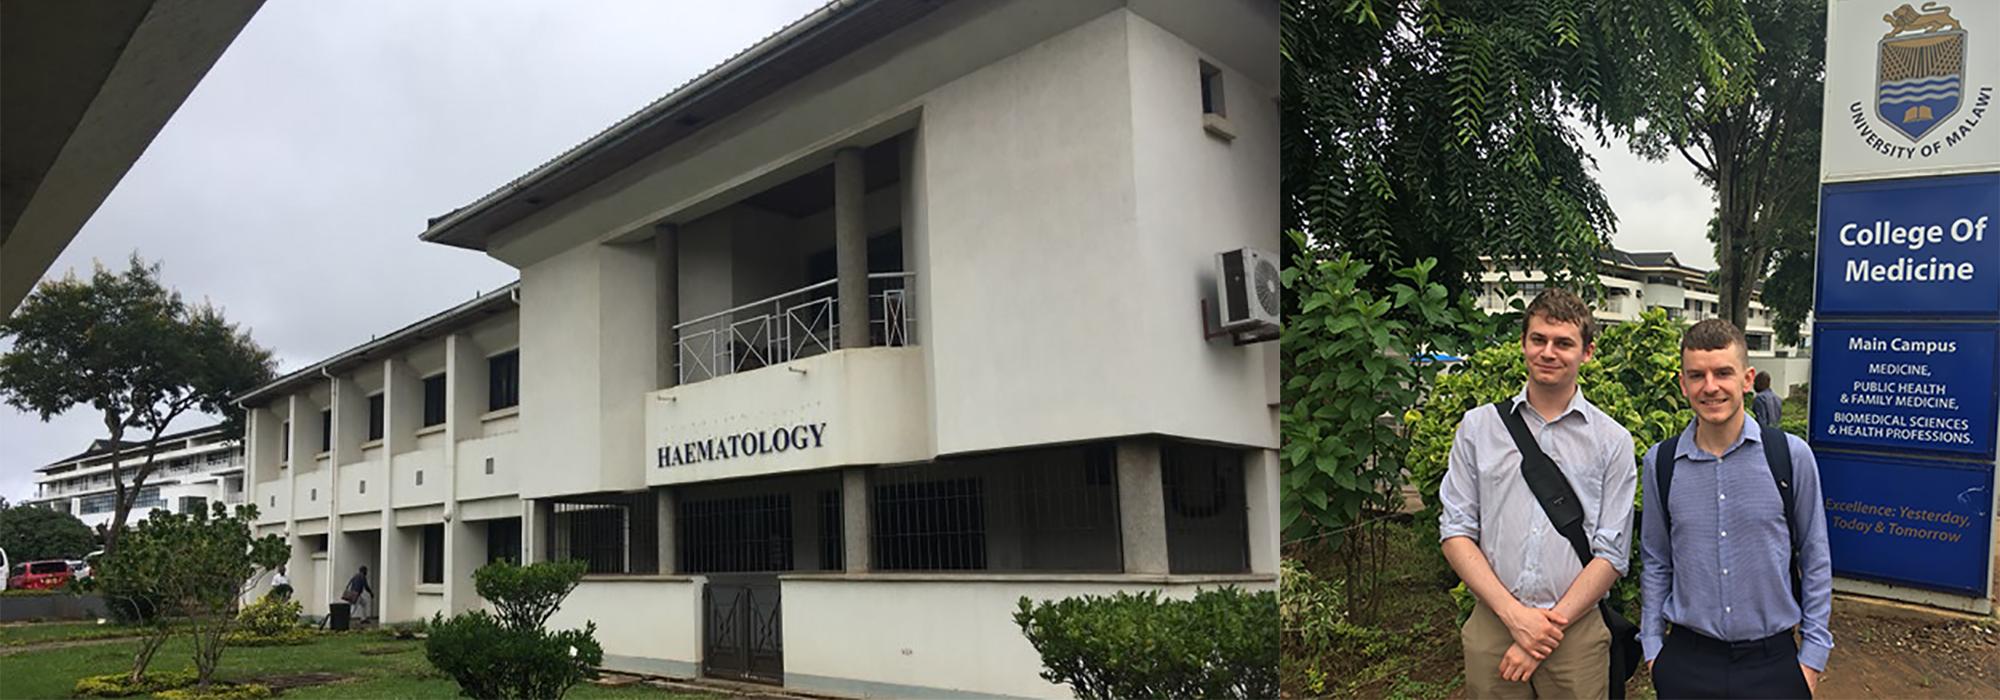 Left: The Haematology Department (which appears on the 100 kwacha bank note) at the College of Medicine, Blantyre, Malawi; Right: Thomas Whitehead and Jonathan Mandolo